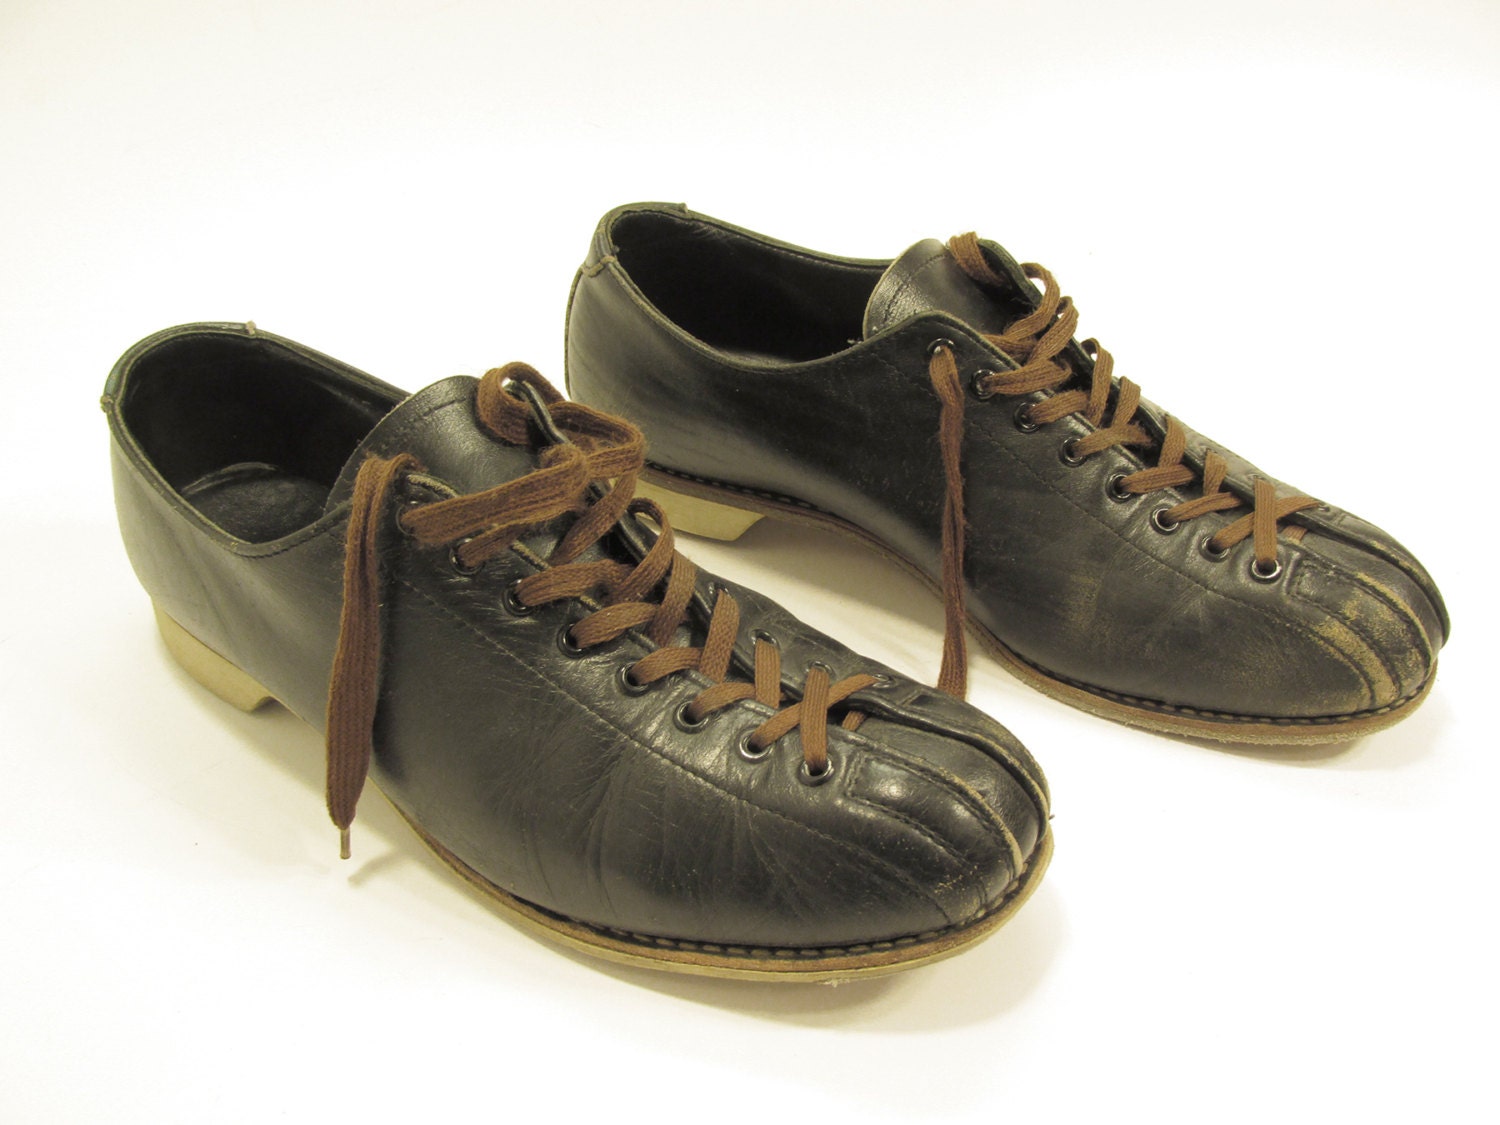 Vintage Black Leather Bowling shoes by RobeyPlaceVintage on Etsy